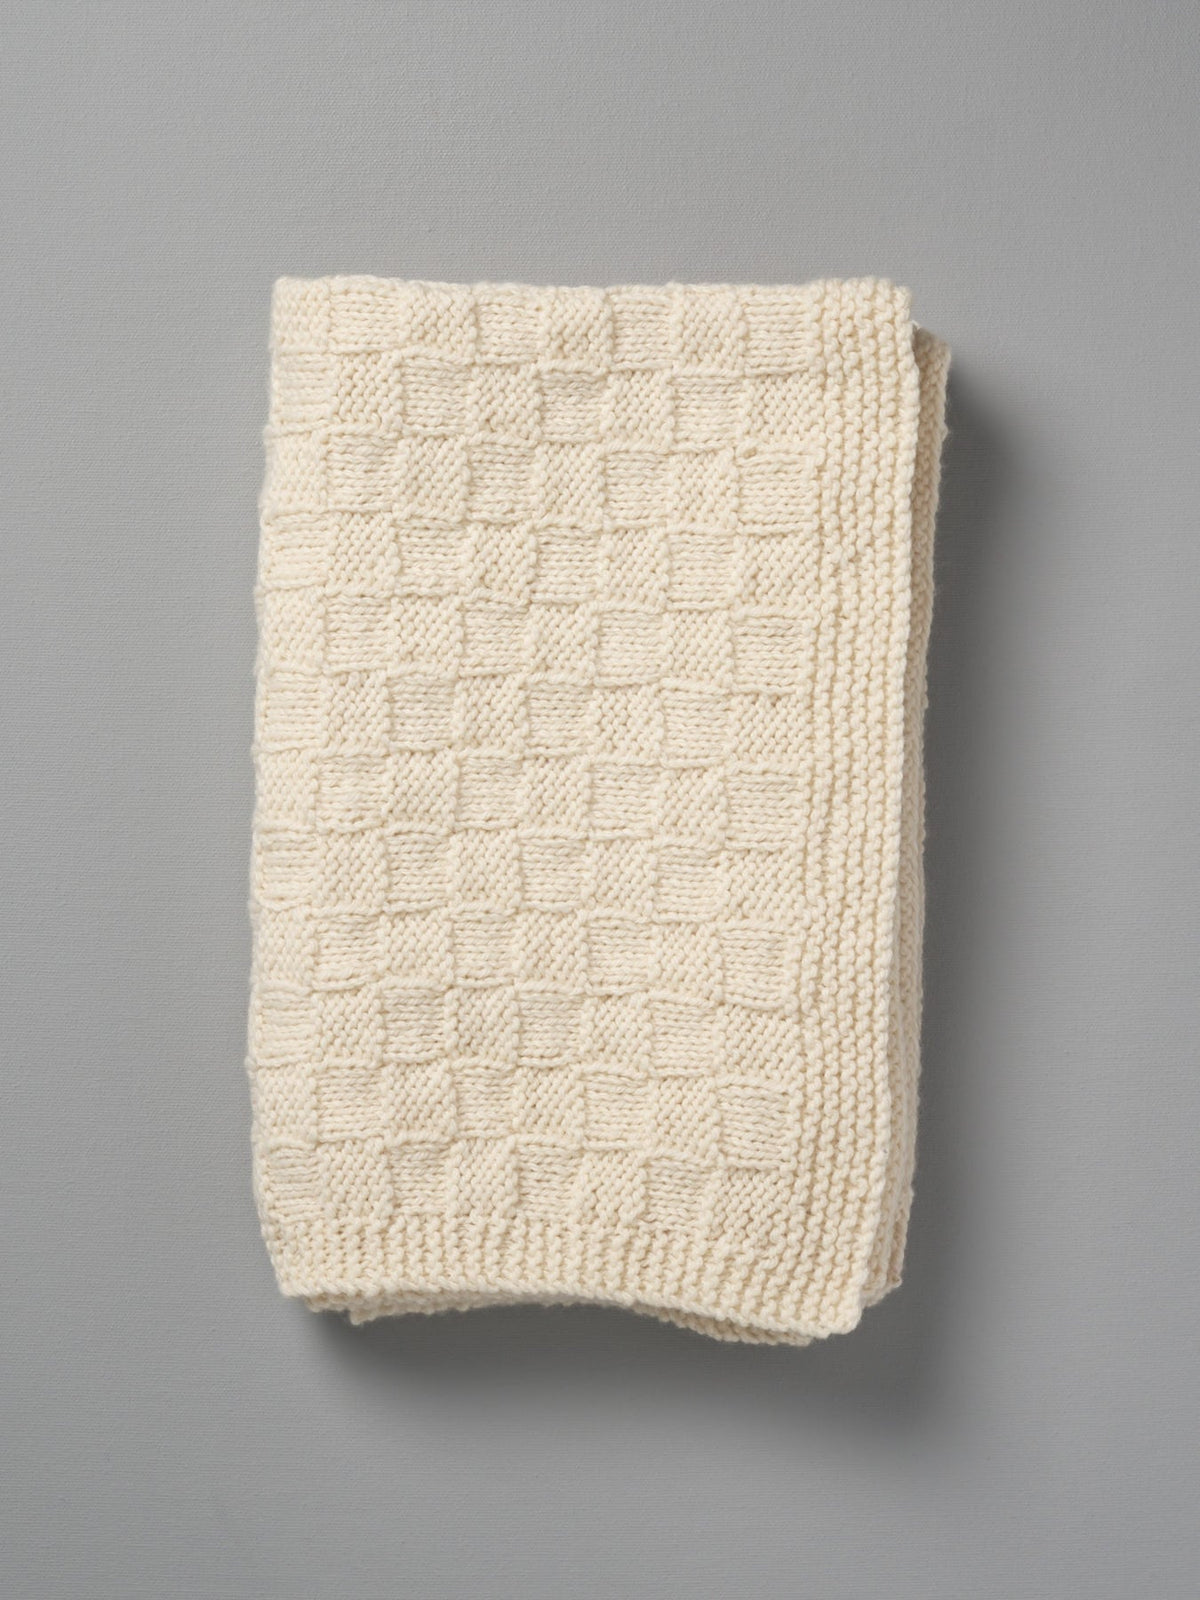 A Weebits Hand Knitted Travel Rug - Natural on a gray background.